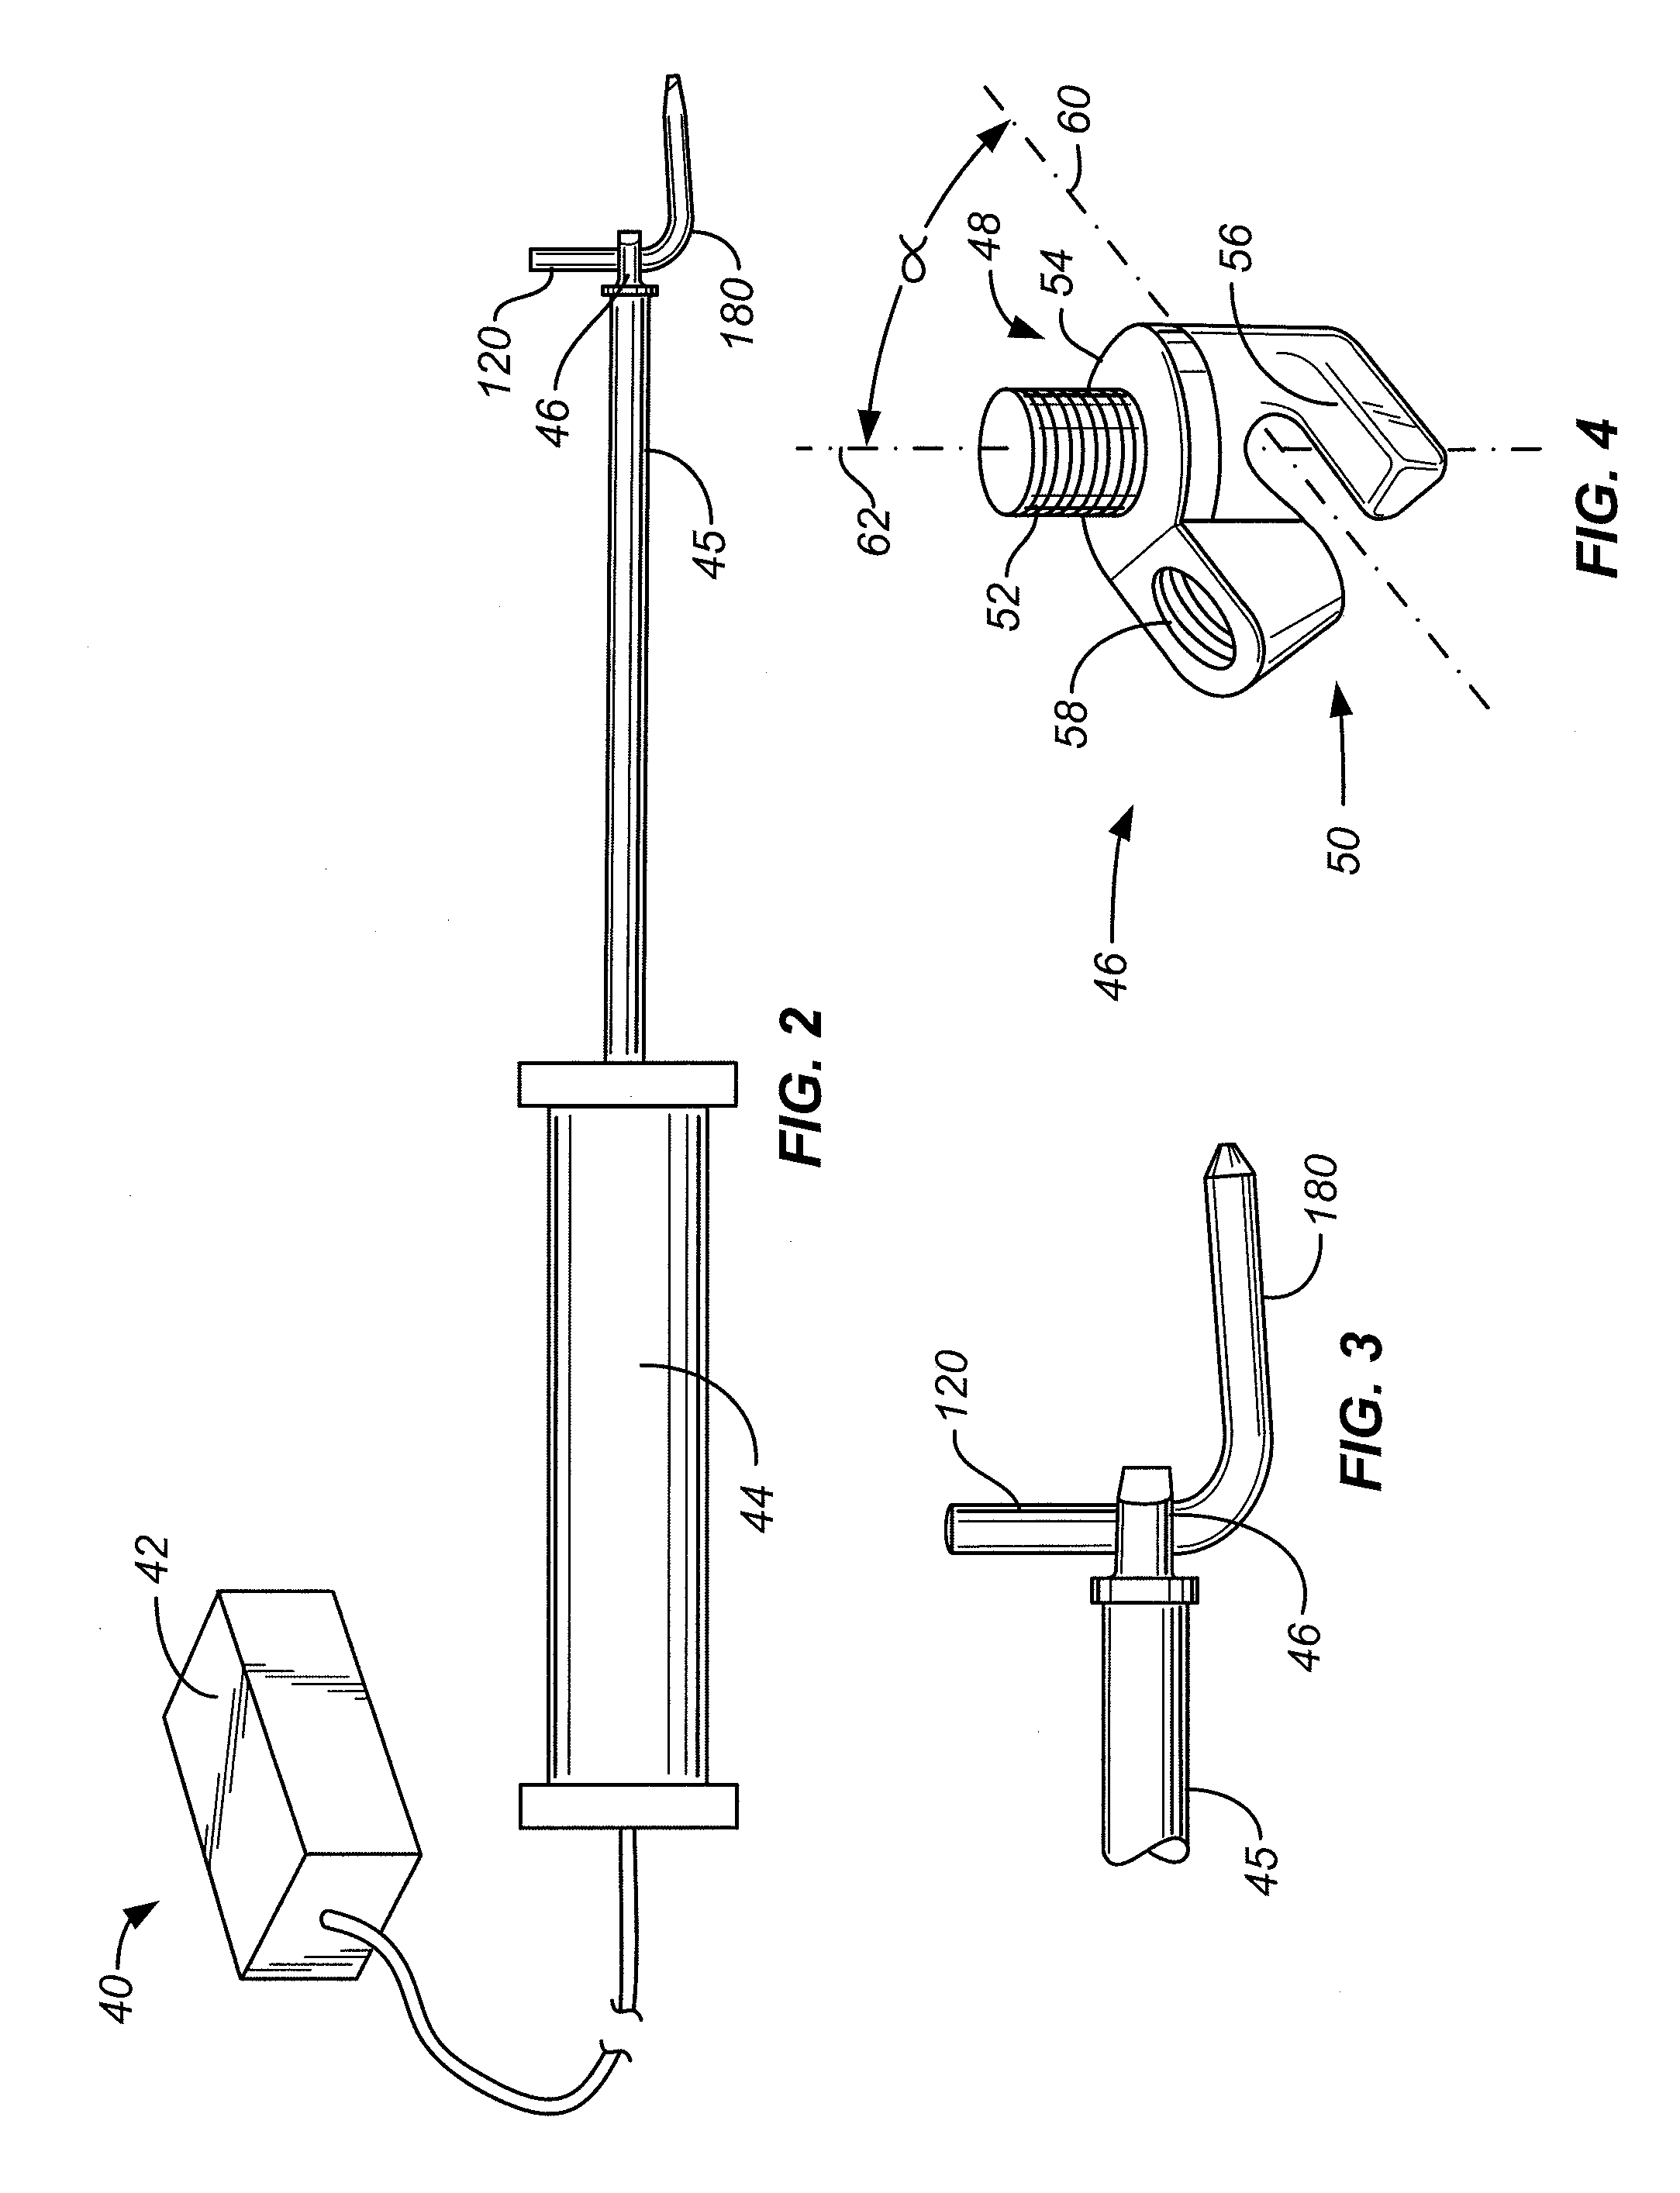 Facet replacement device removal and revision systems and methods